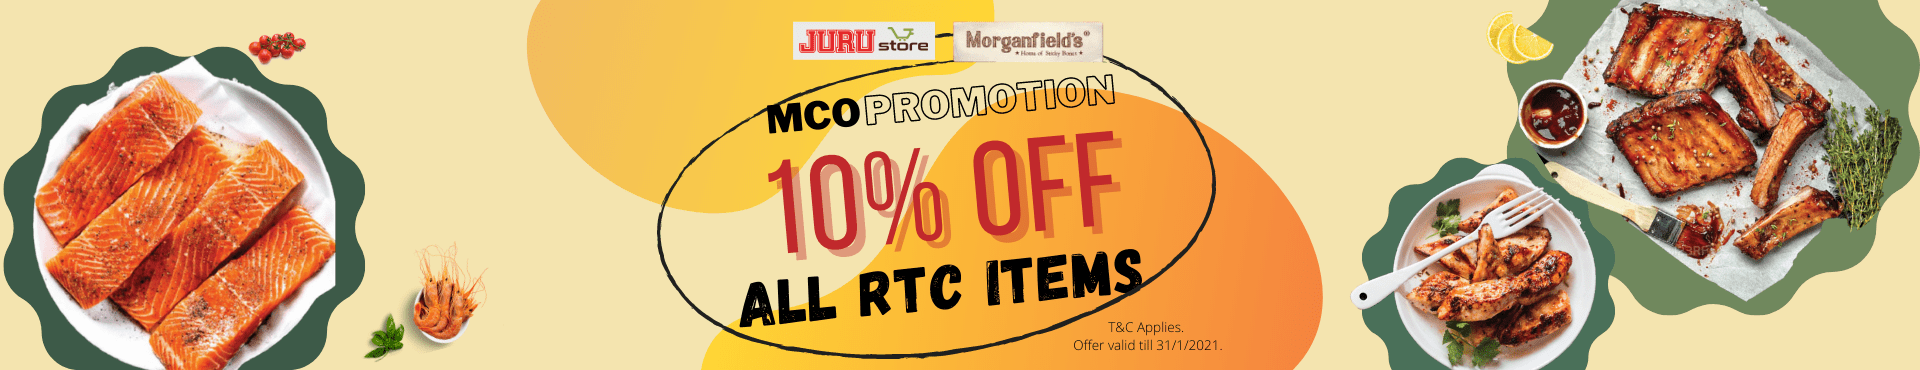 MCO Promotion: 10% off ALL Morganfield’s RTC Items